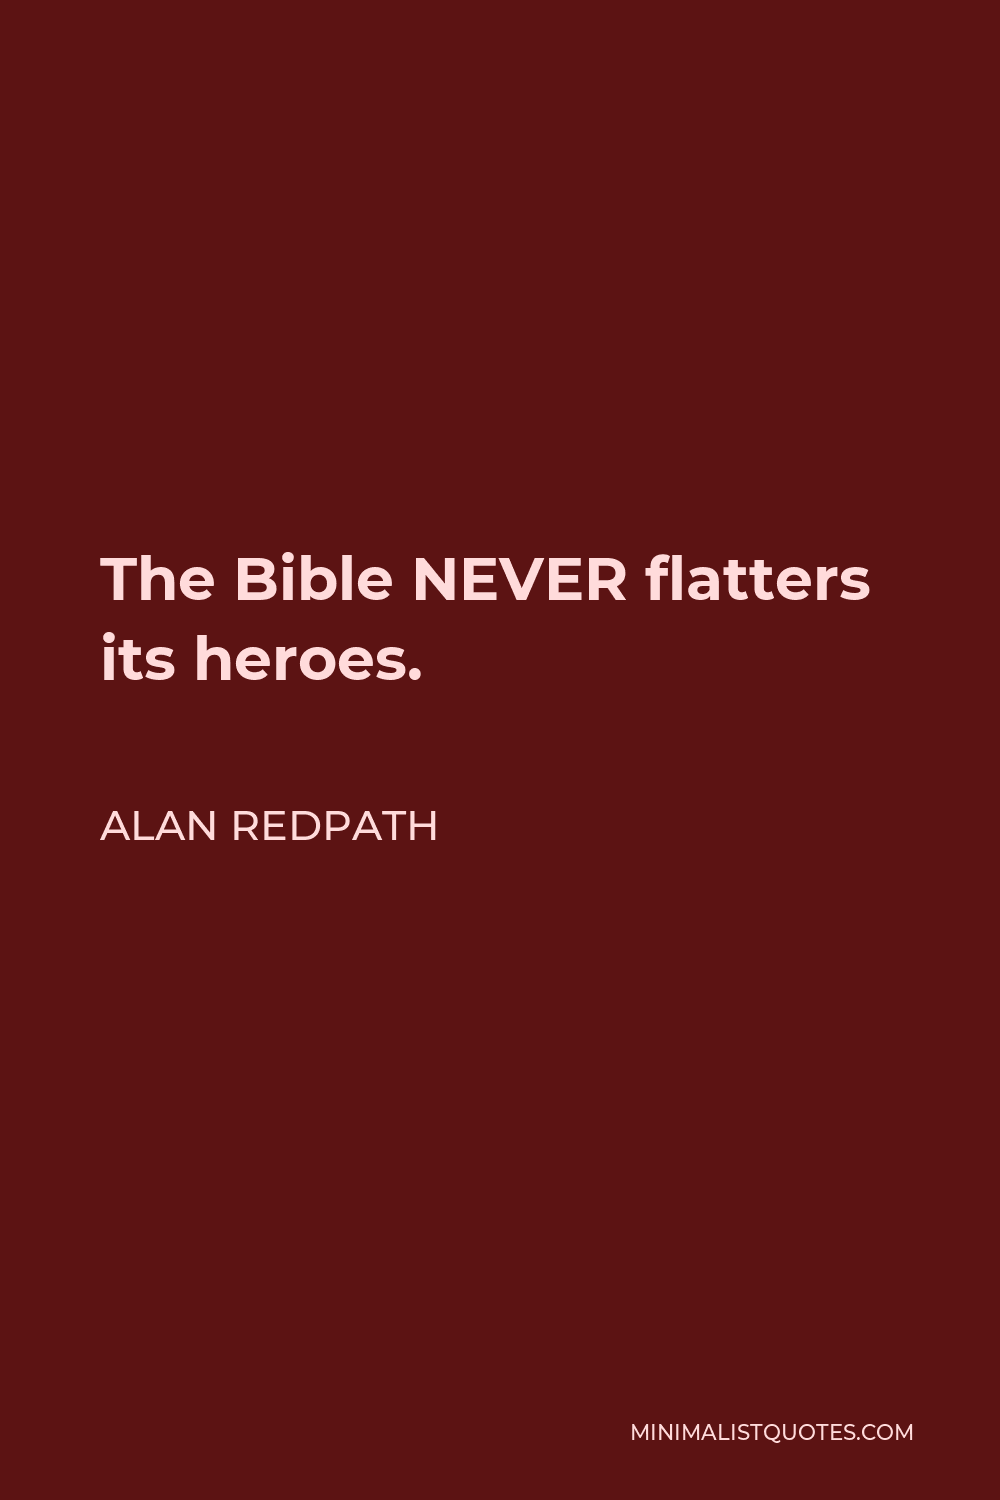 Alan Redpath Quote - The Bible NEVER flatters its heroes.